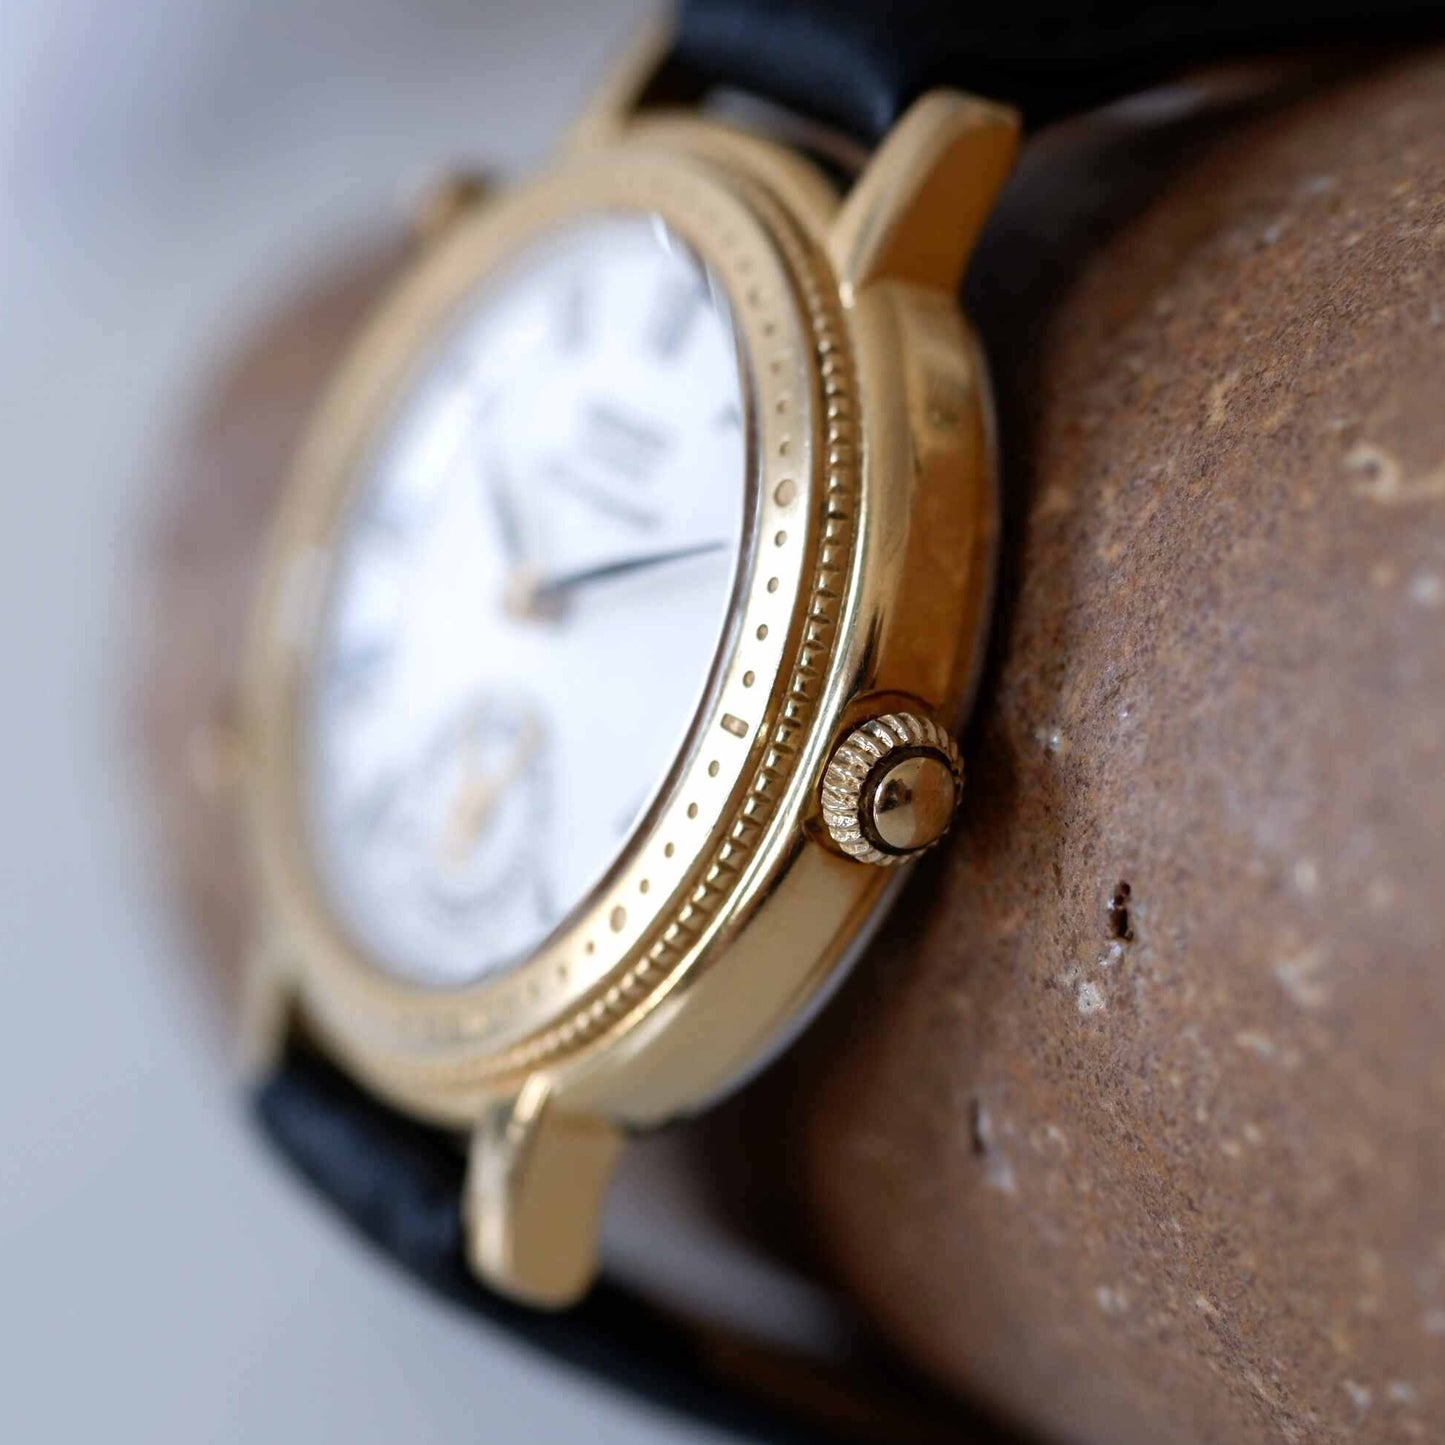 Seiko Chronograph Vintage Ladies Watch: 90s Golden with Roman Numerals | Side View Right